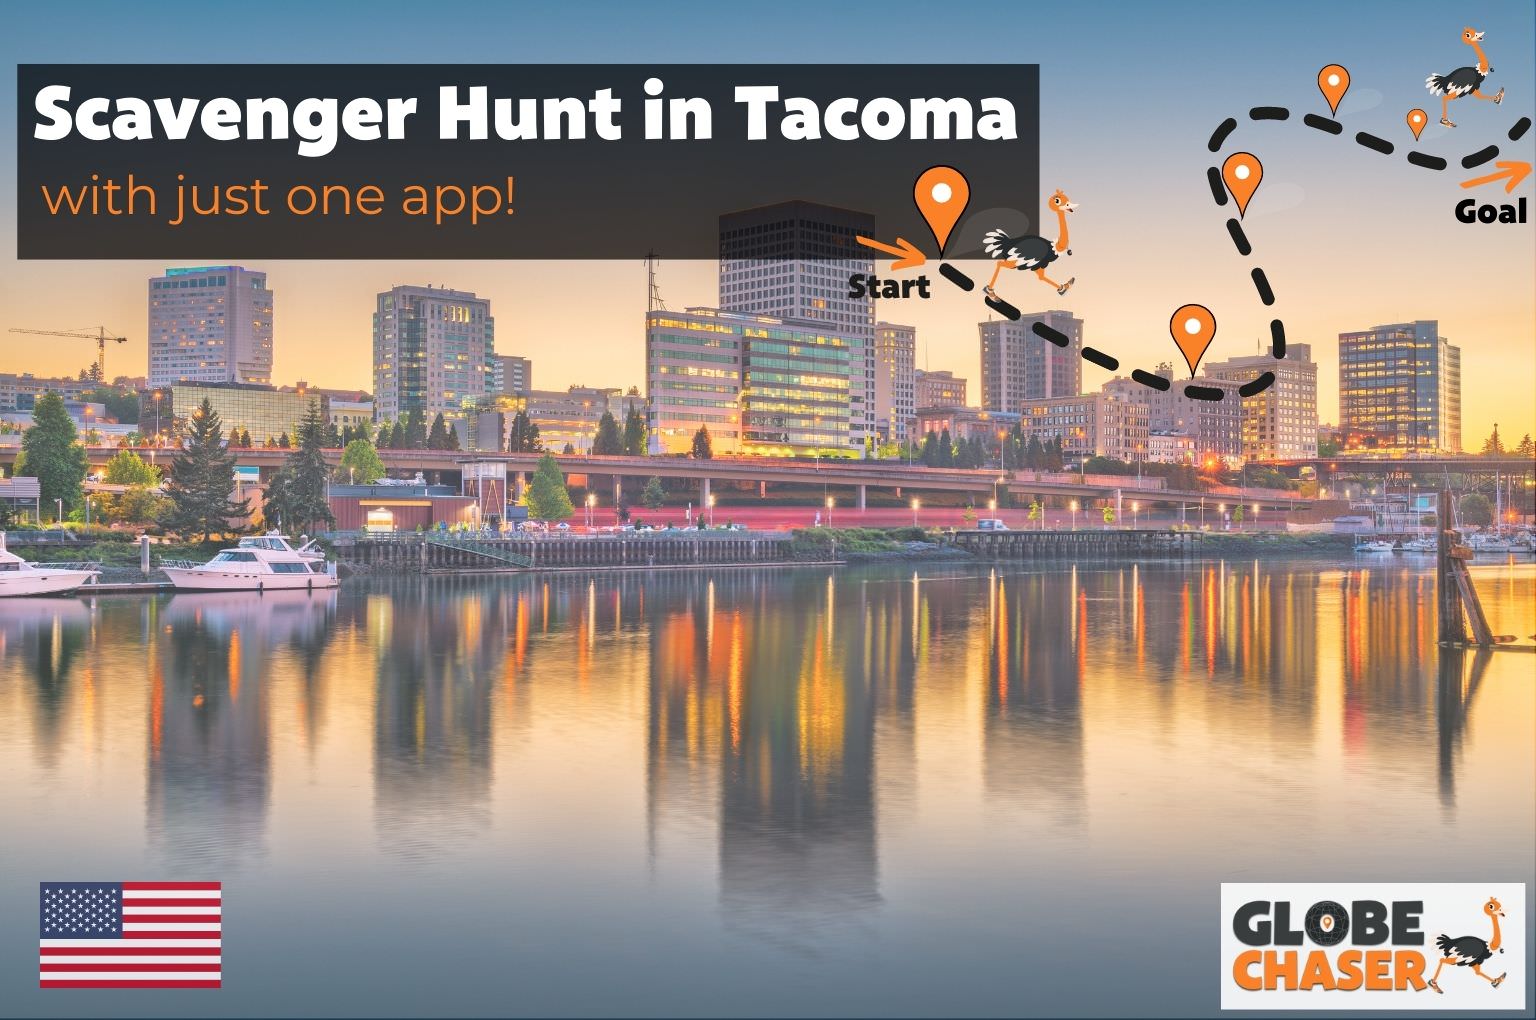 Scavenger Hunt in Tacoma, USA - Family Activities with the Globe Chaser App for Outdoor Fun